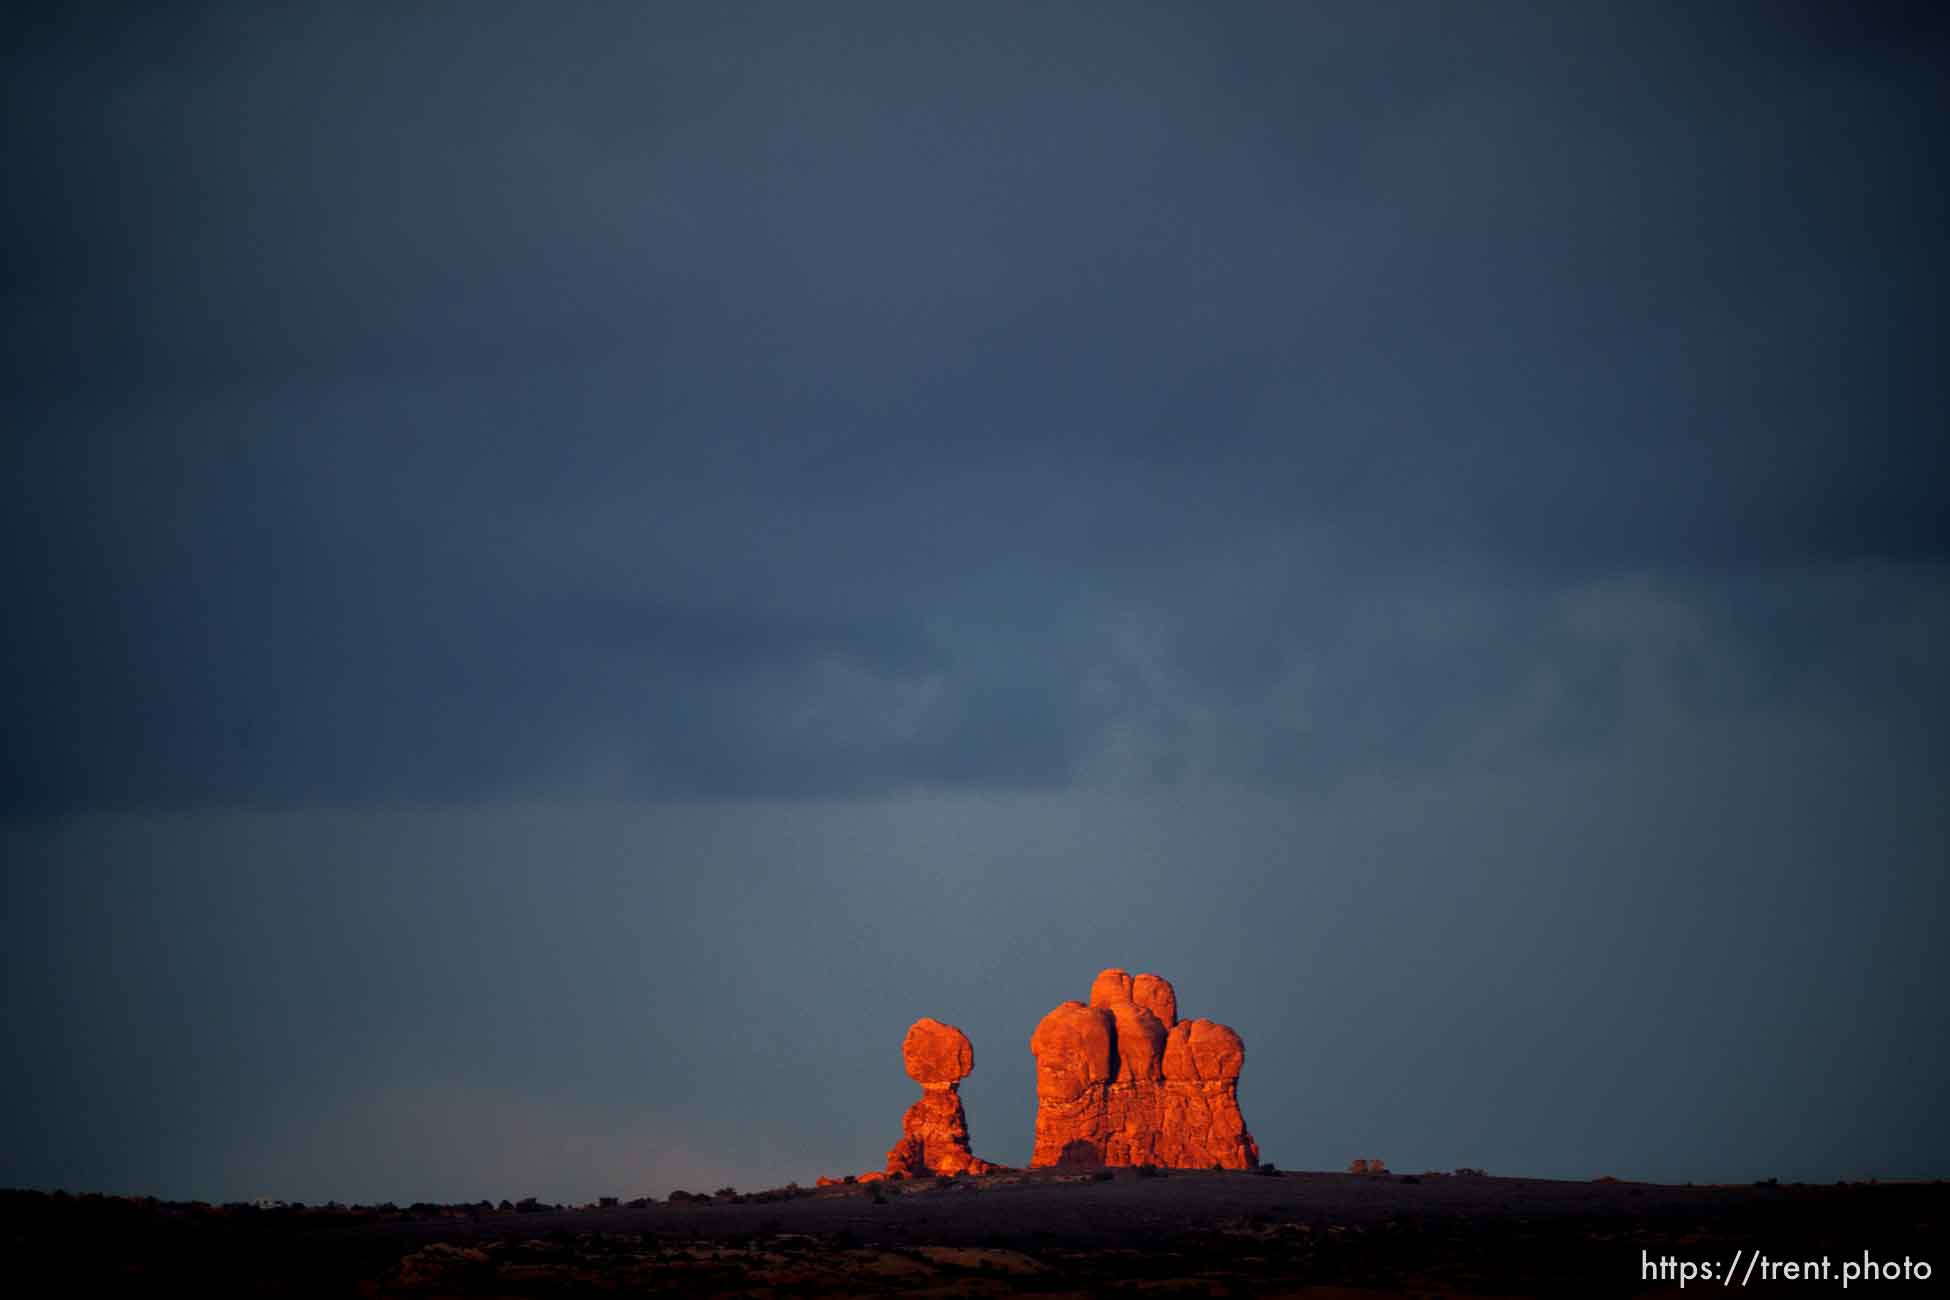 A beautiful night in Arches National Park - Balanced Rock